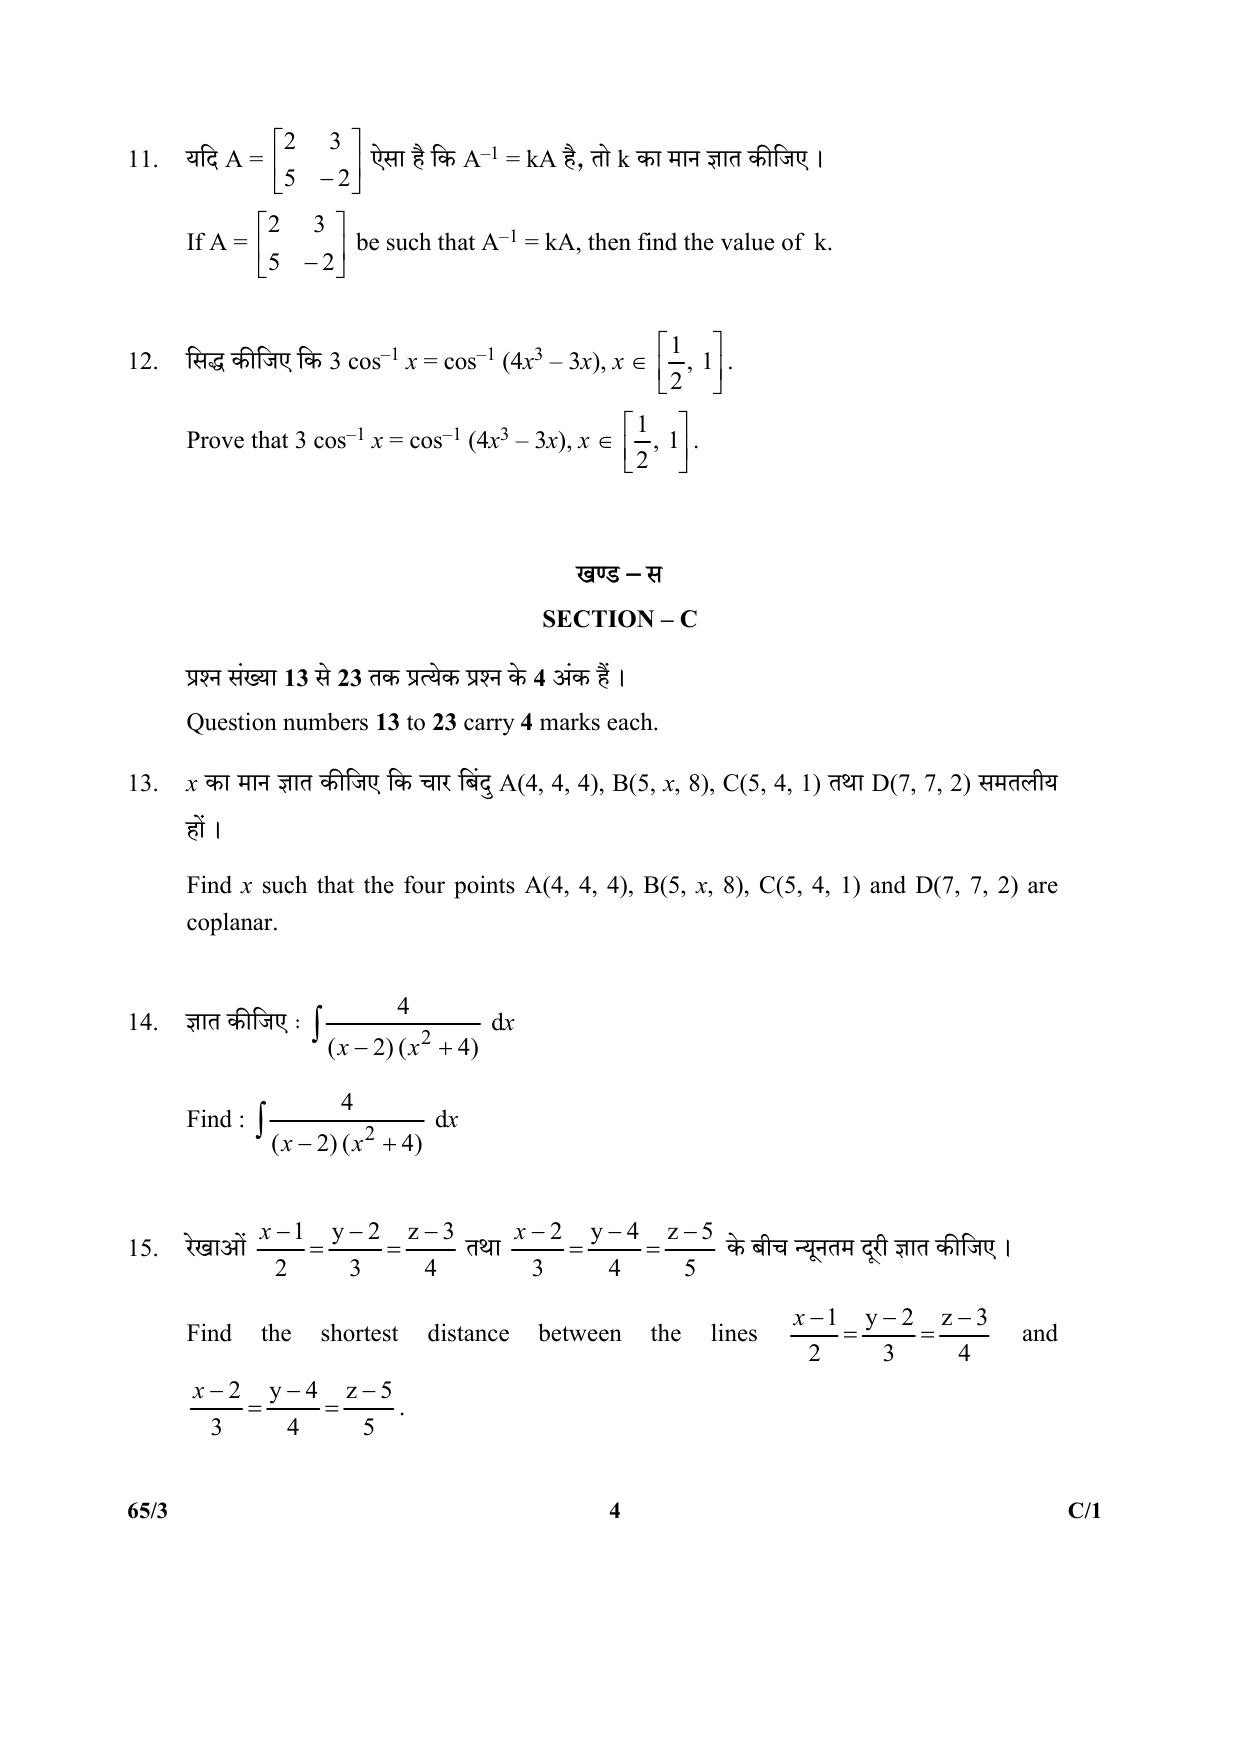 CBSE Class 12 65-3 (Mathematics) 2018 Compartment Question Paper - Page 4